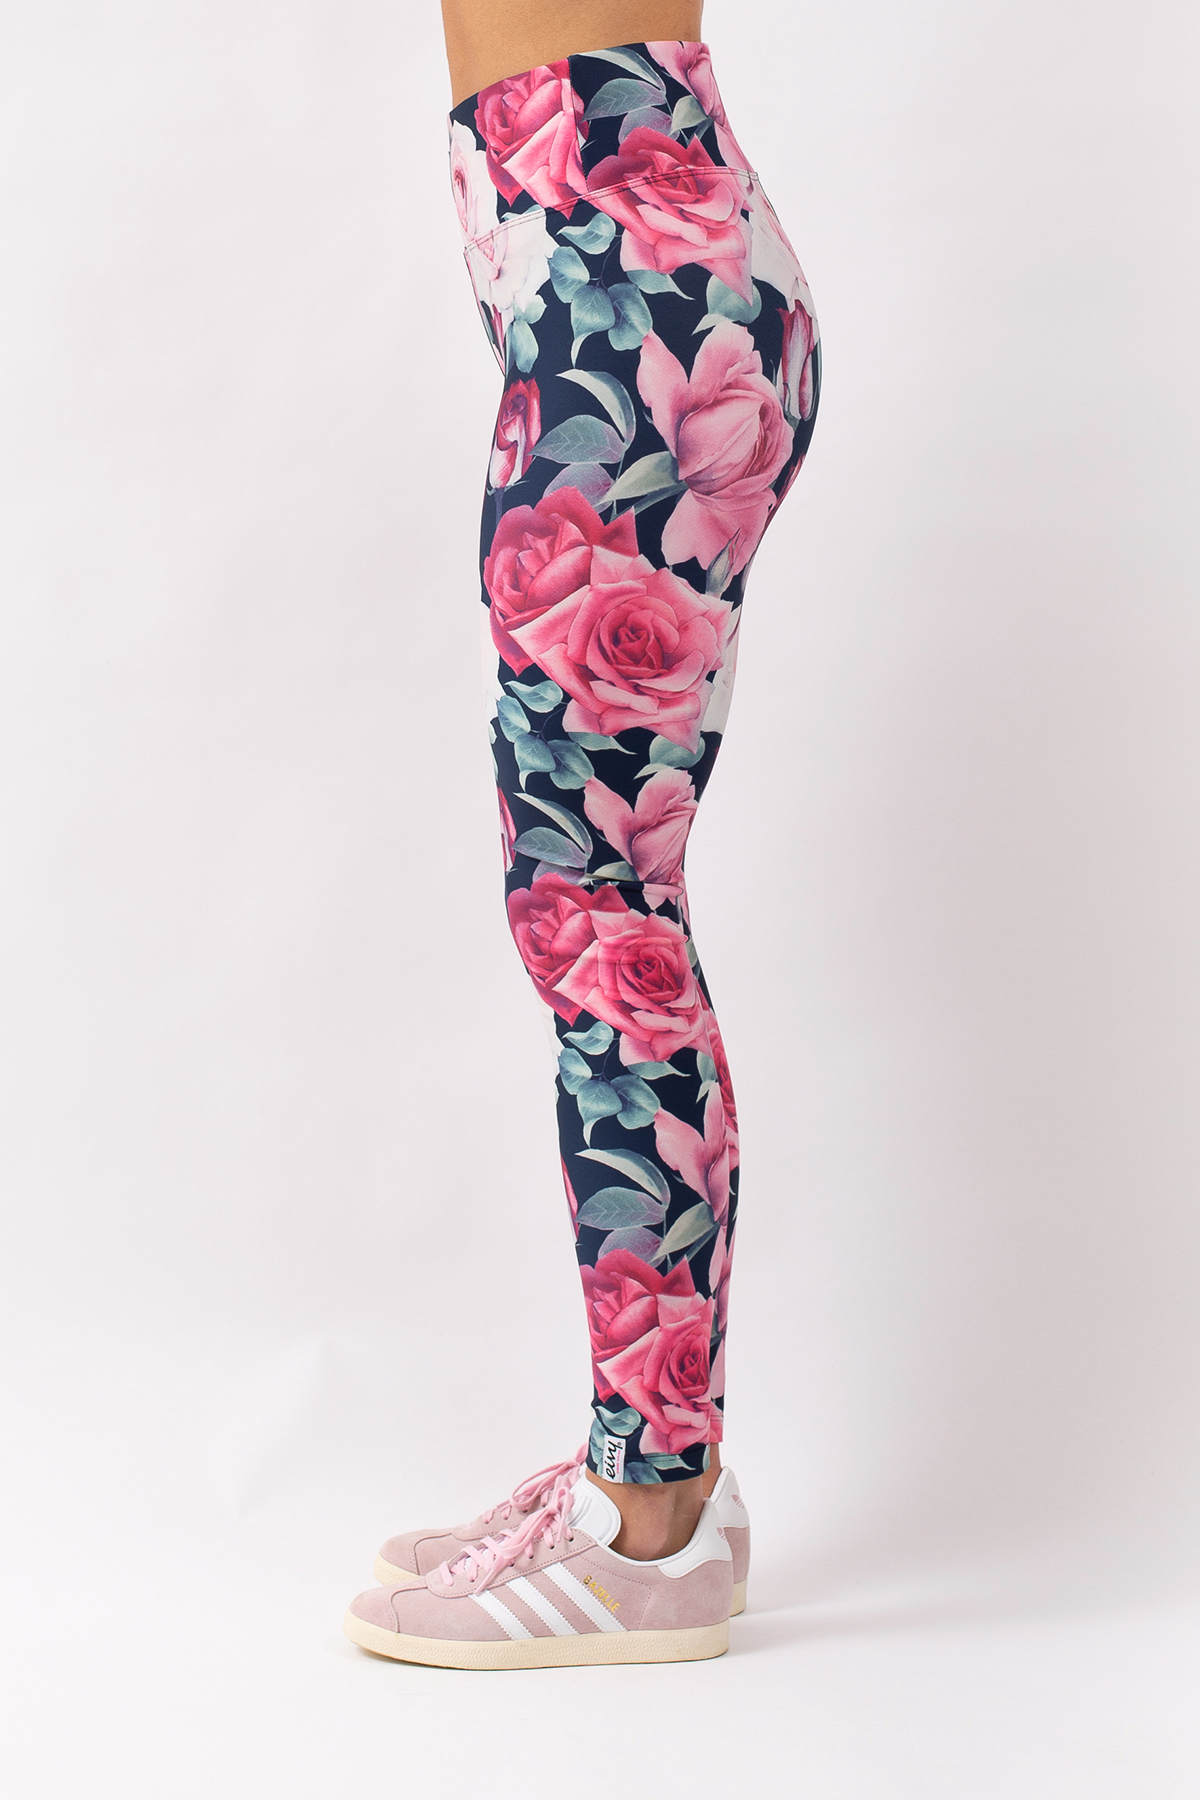 Base Layer | Icecold Tights - Winter Blossom | XS